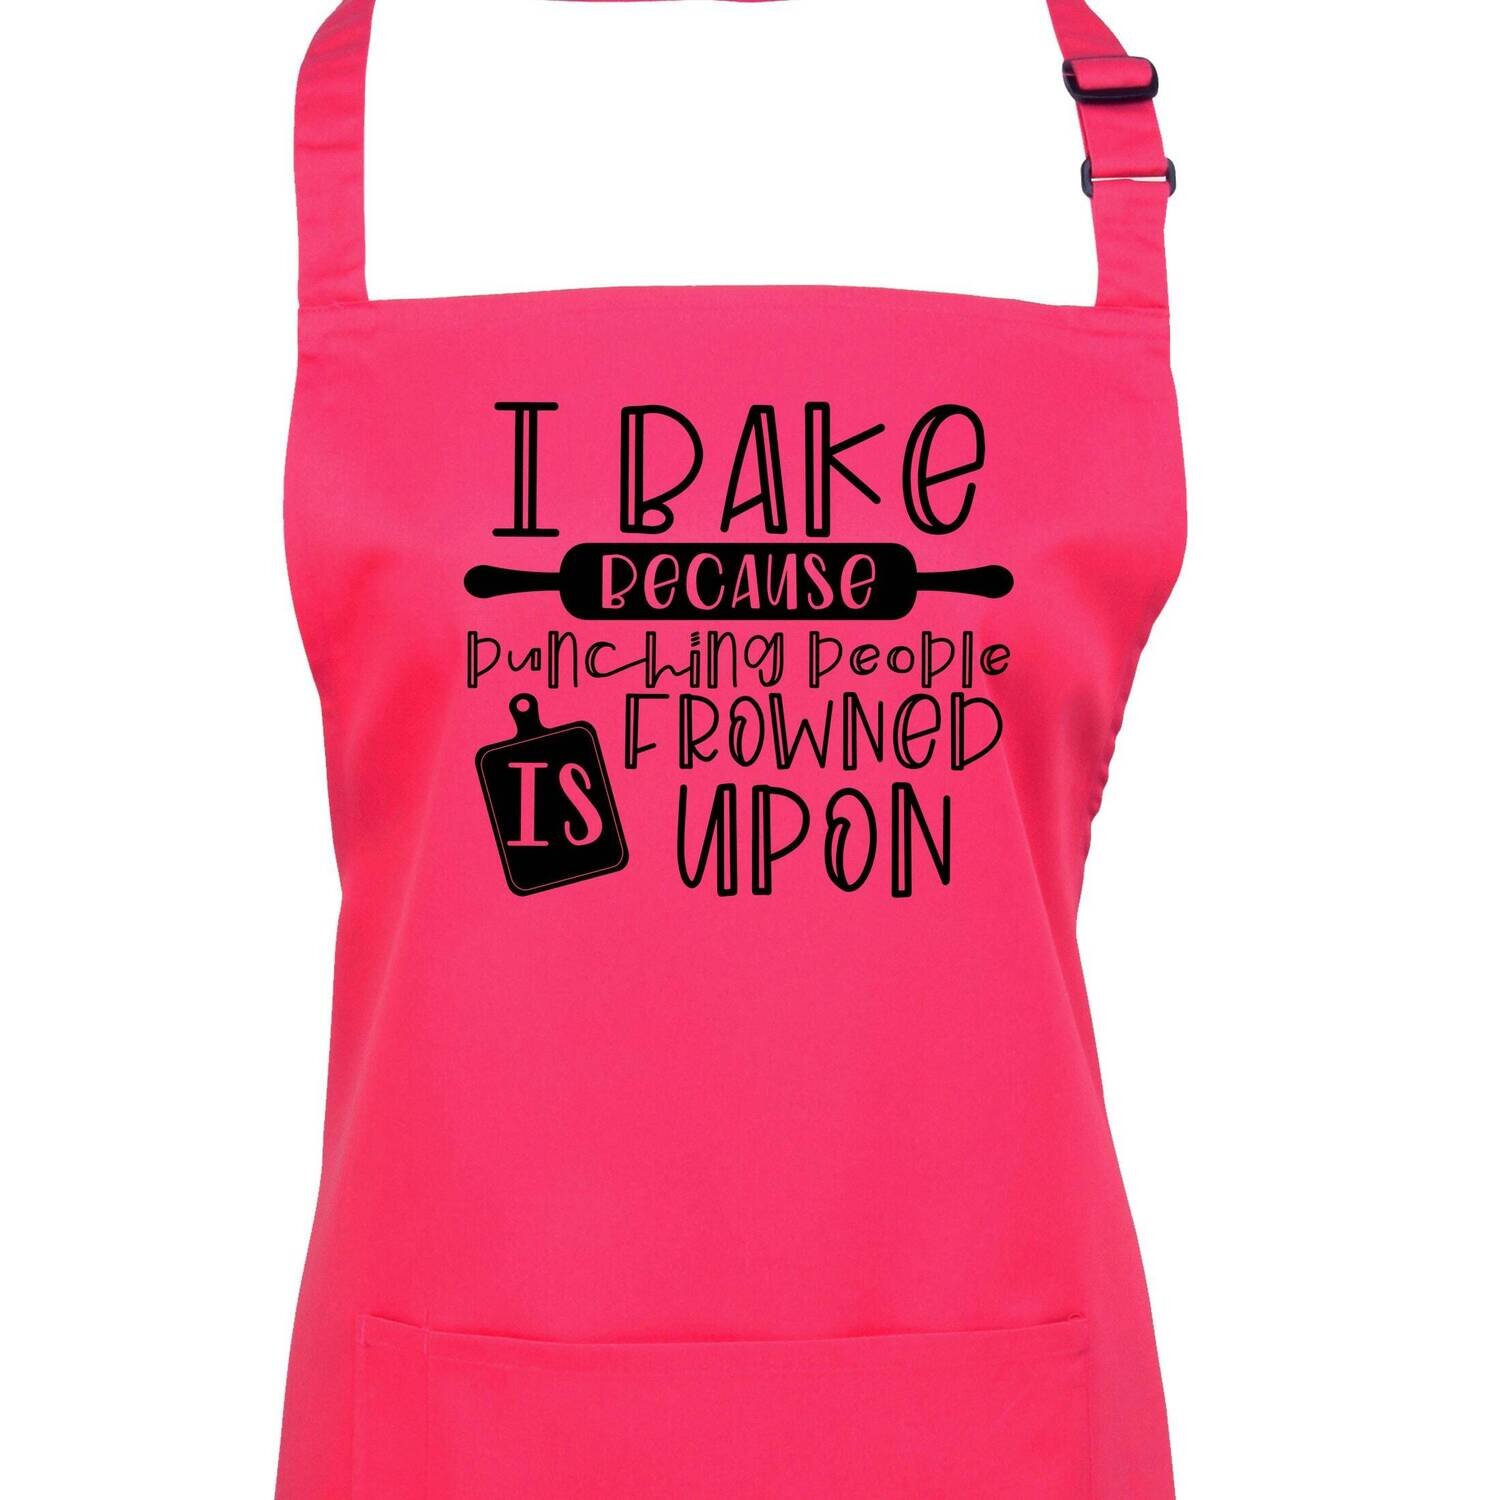 Bake Because Punching is Frowned Upon Apron in 23 Colours